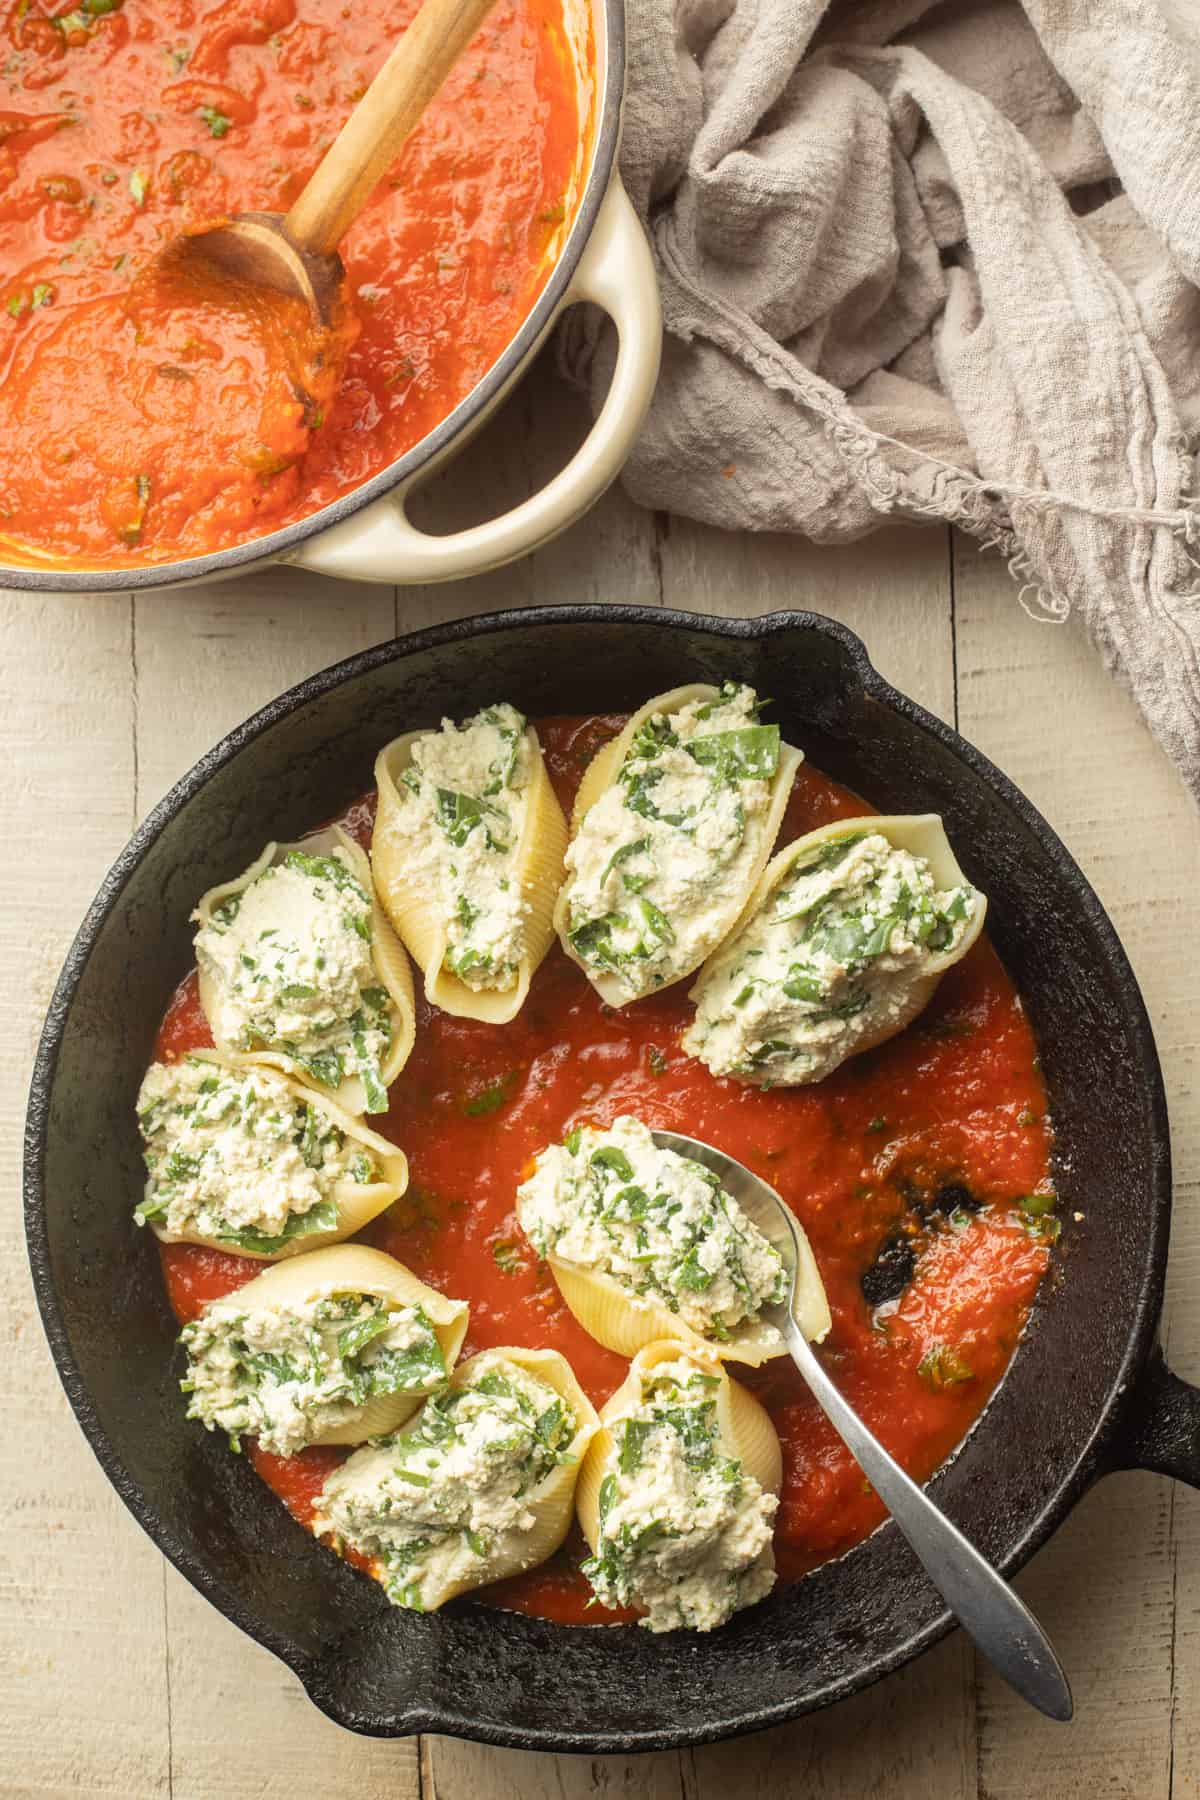 Skillet filled with tomato sauce and uncooked vegan stuffed shells.